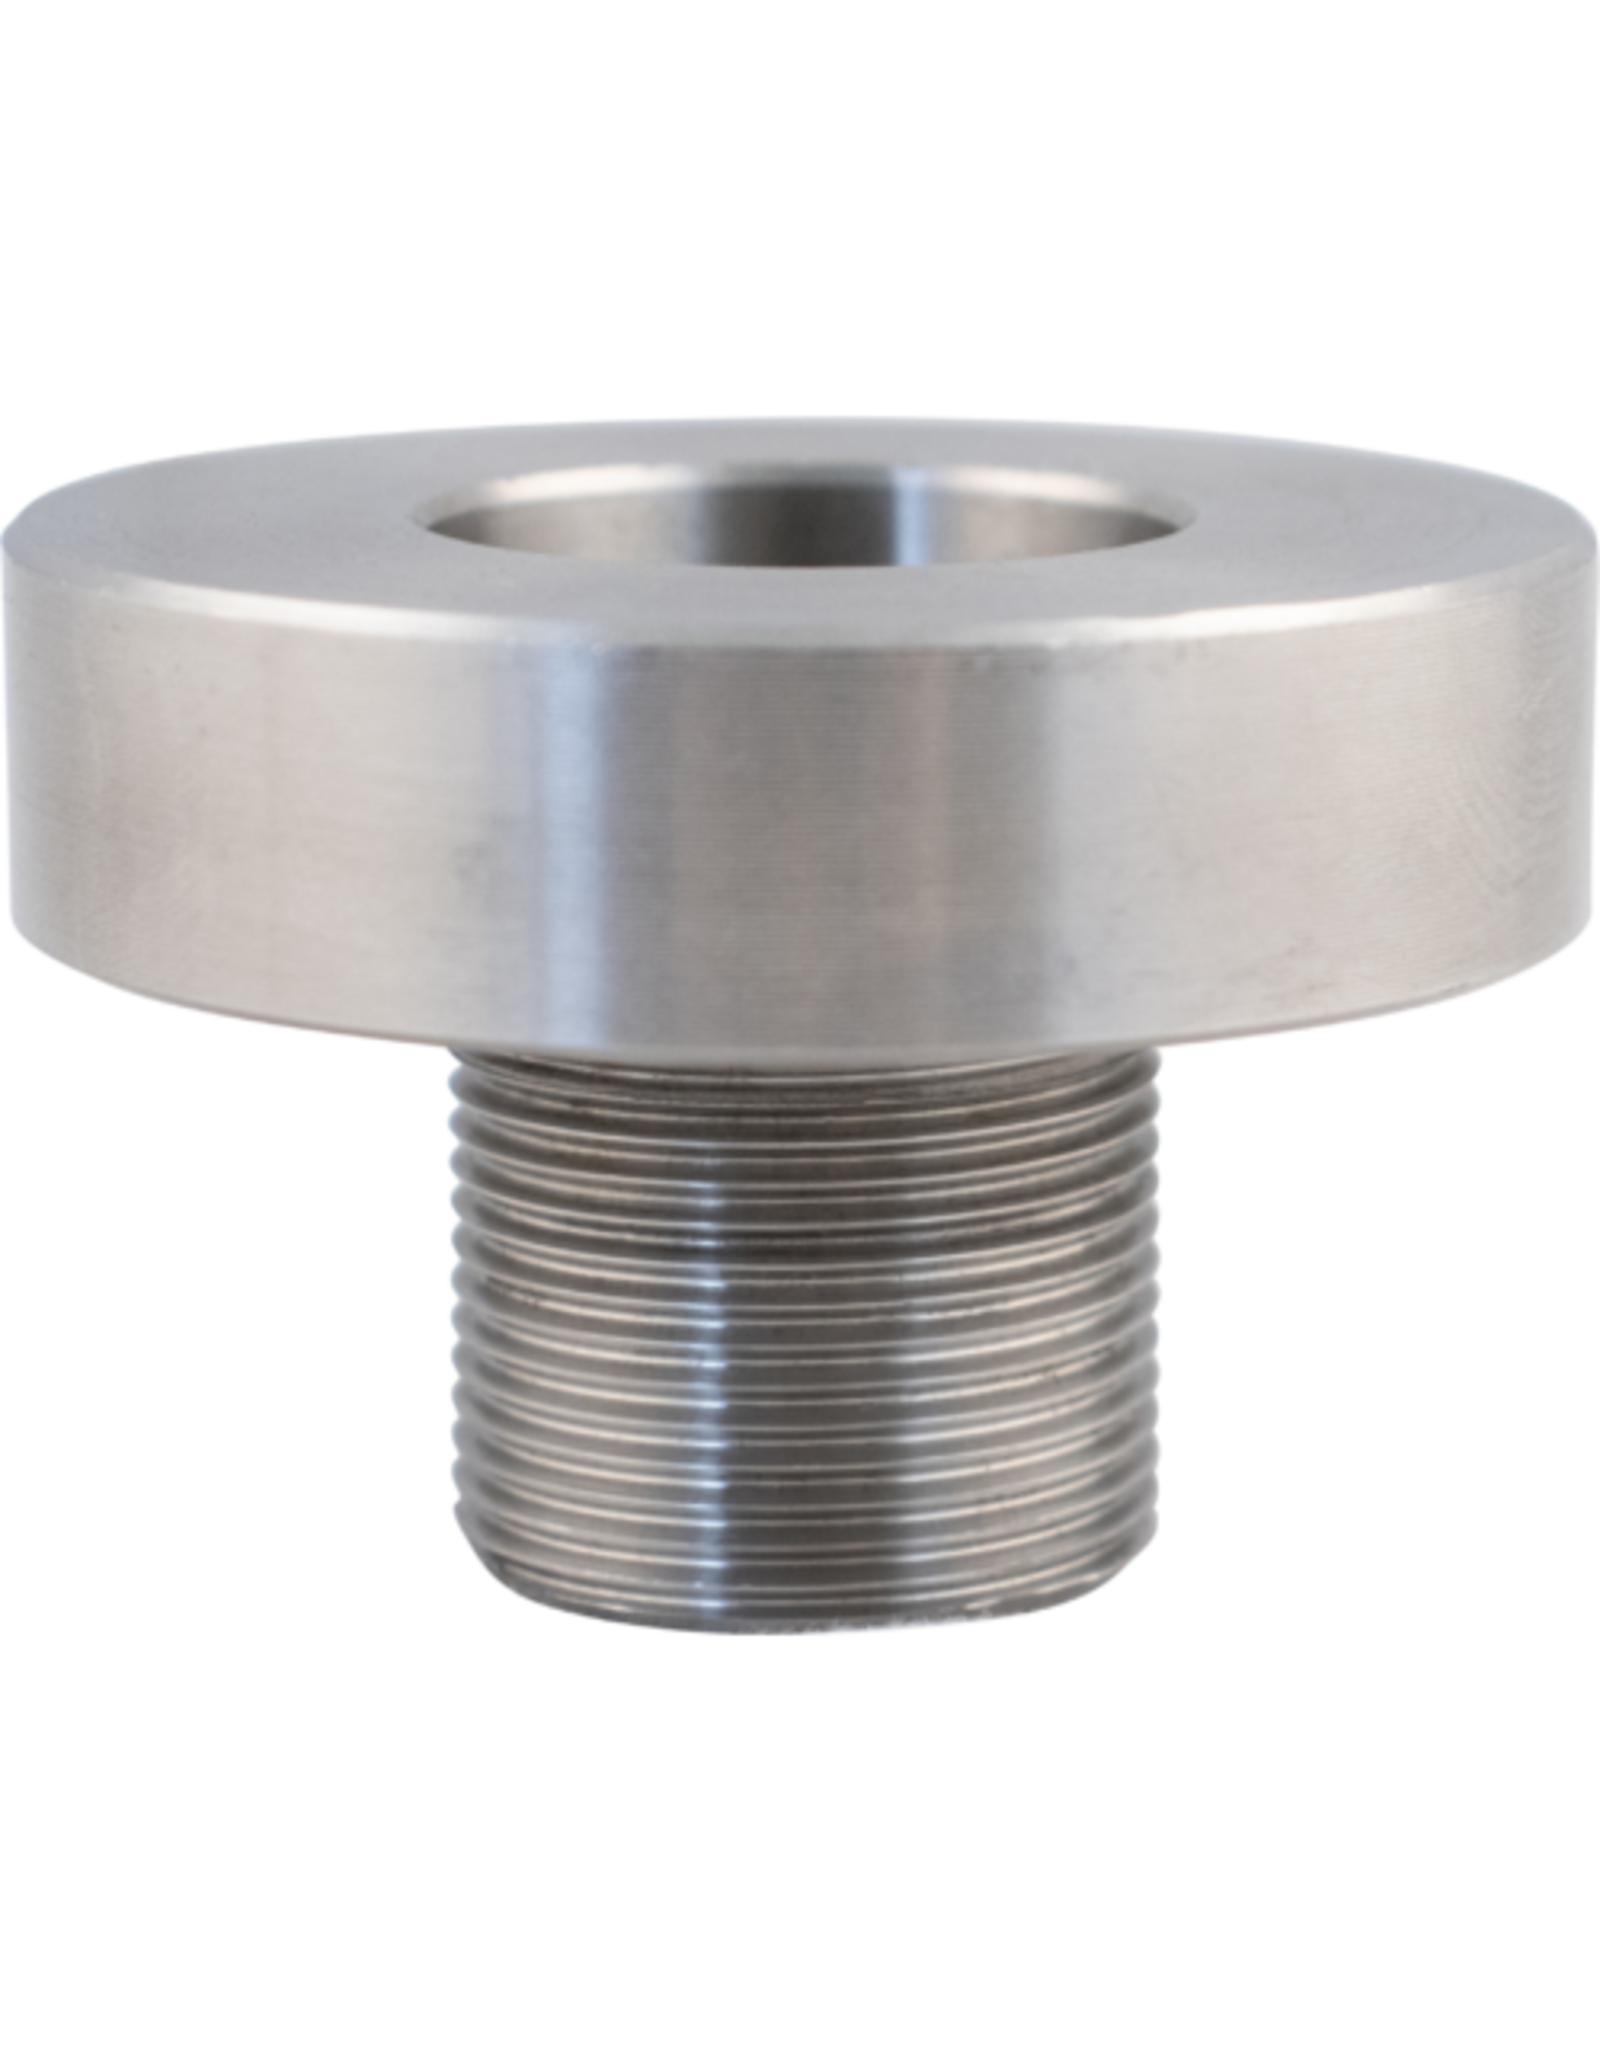 Cannular Replacement Turn Table Base